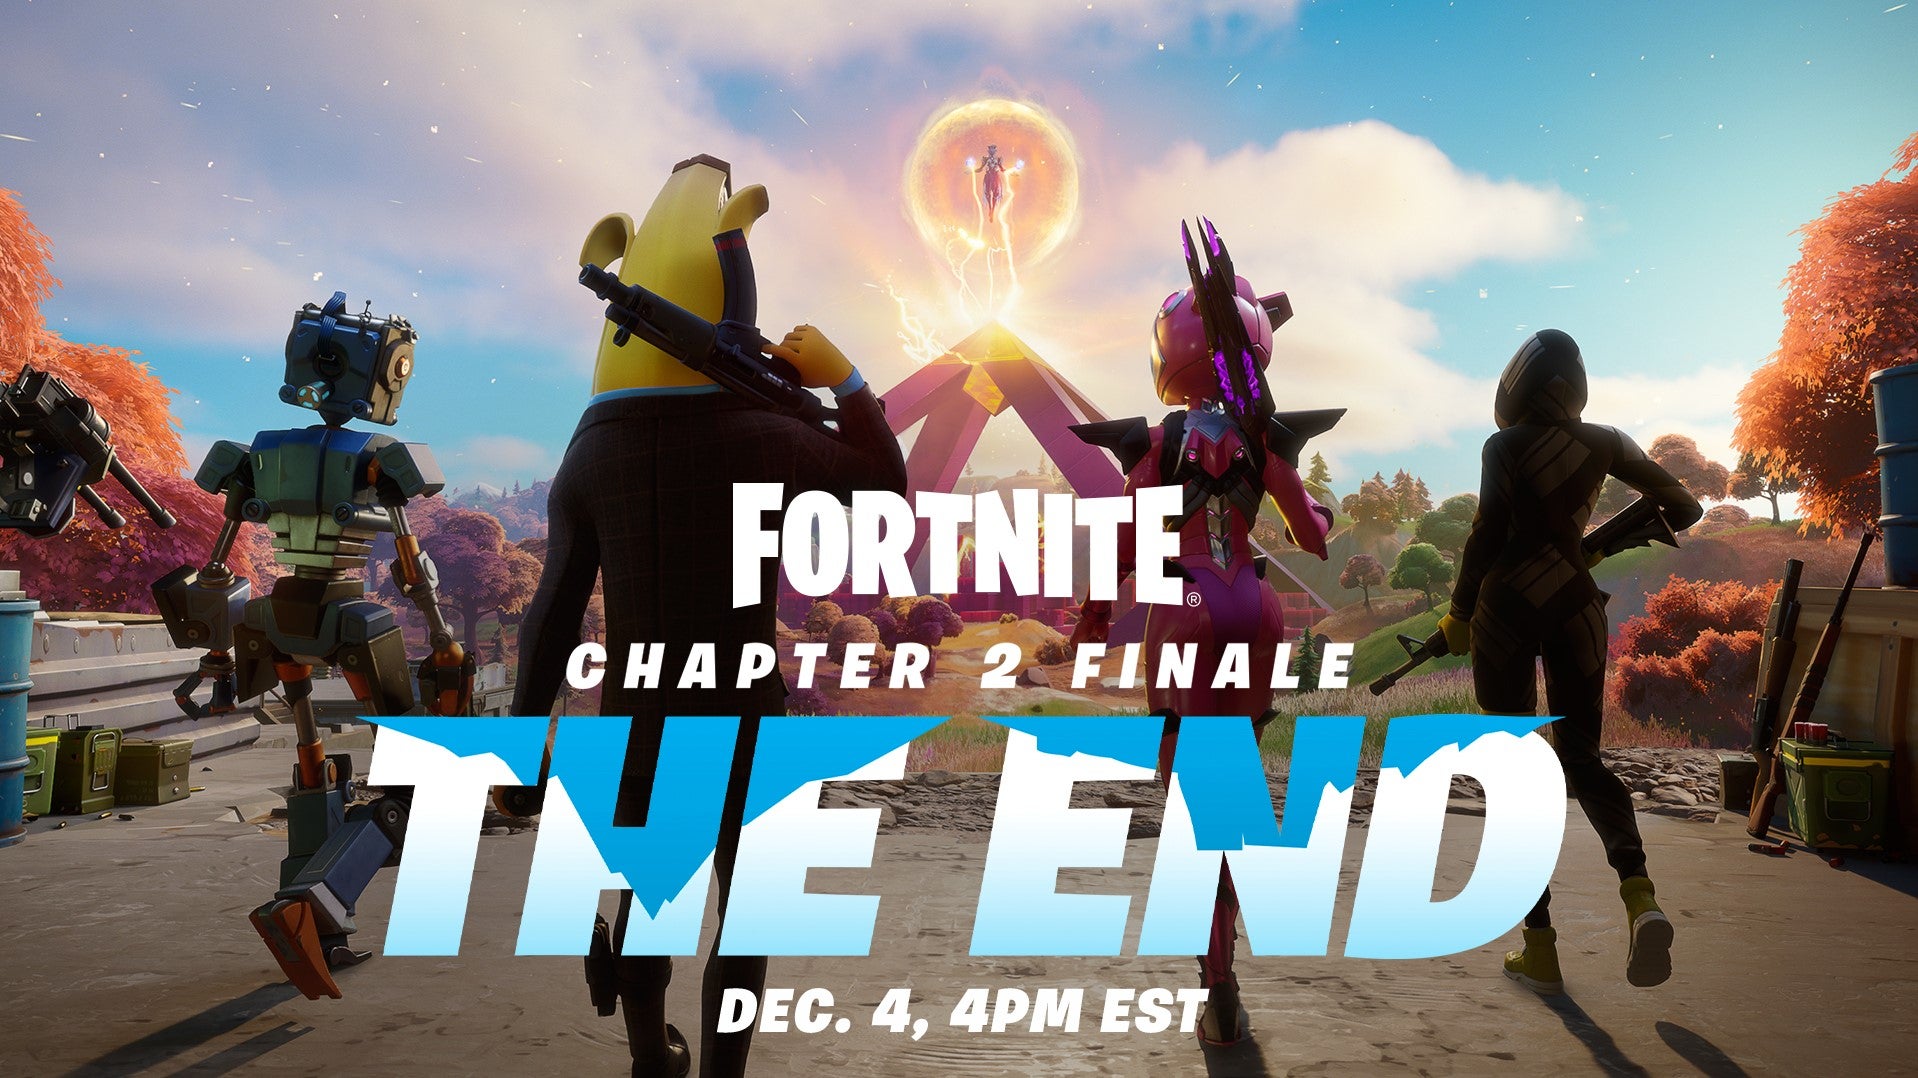 When Is The Fortnite Chapter 2 'The End' Live Event? | Vg247